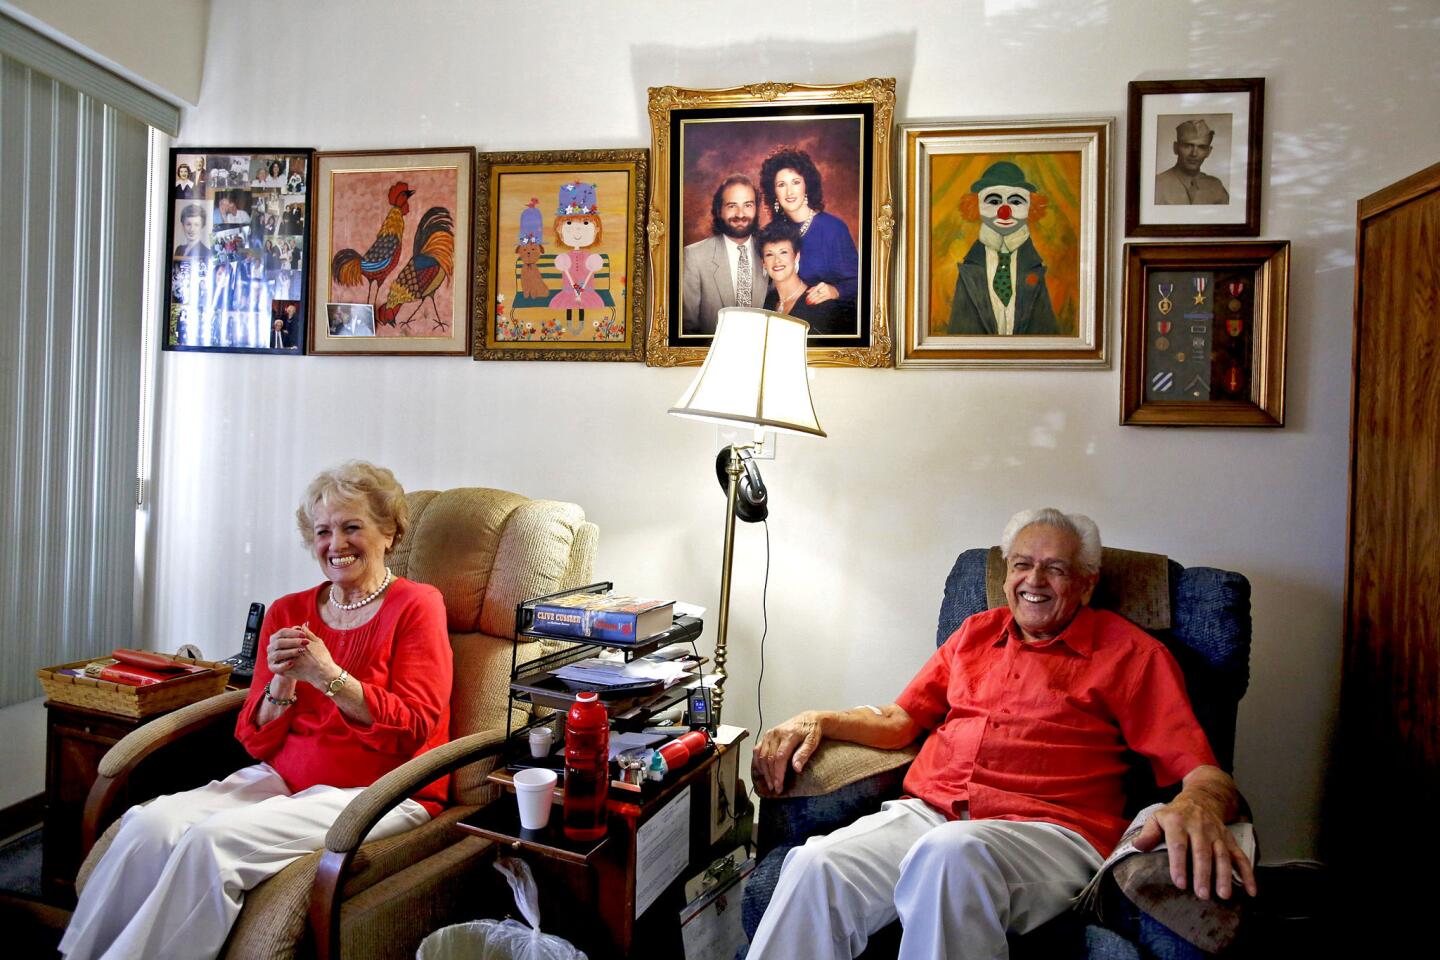 Raymond Sternberg, 93, left, and Jerri Kane, 88, in the room they share after moving in together at the Jewish Home in Reseda last April 8.